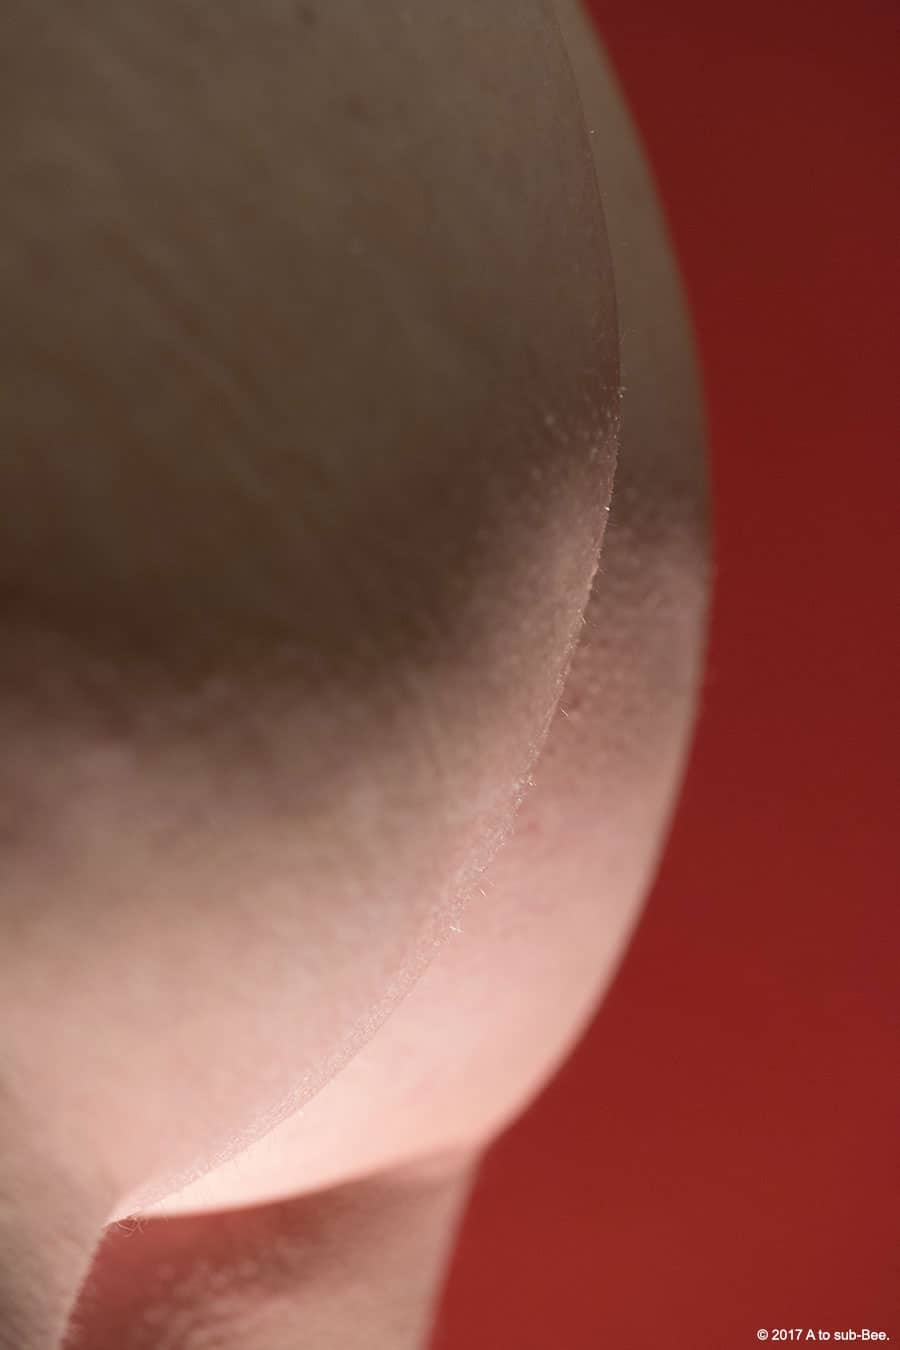 A close up of the side of Bee's bottom against a red background highlighting the beauty of simple curves